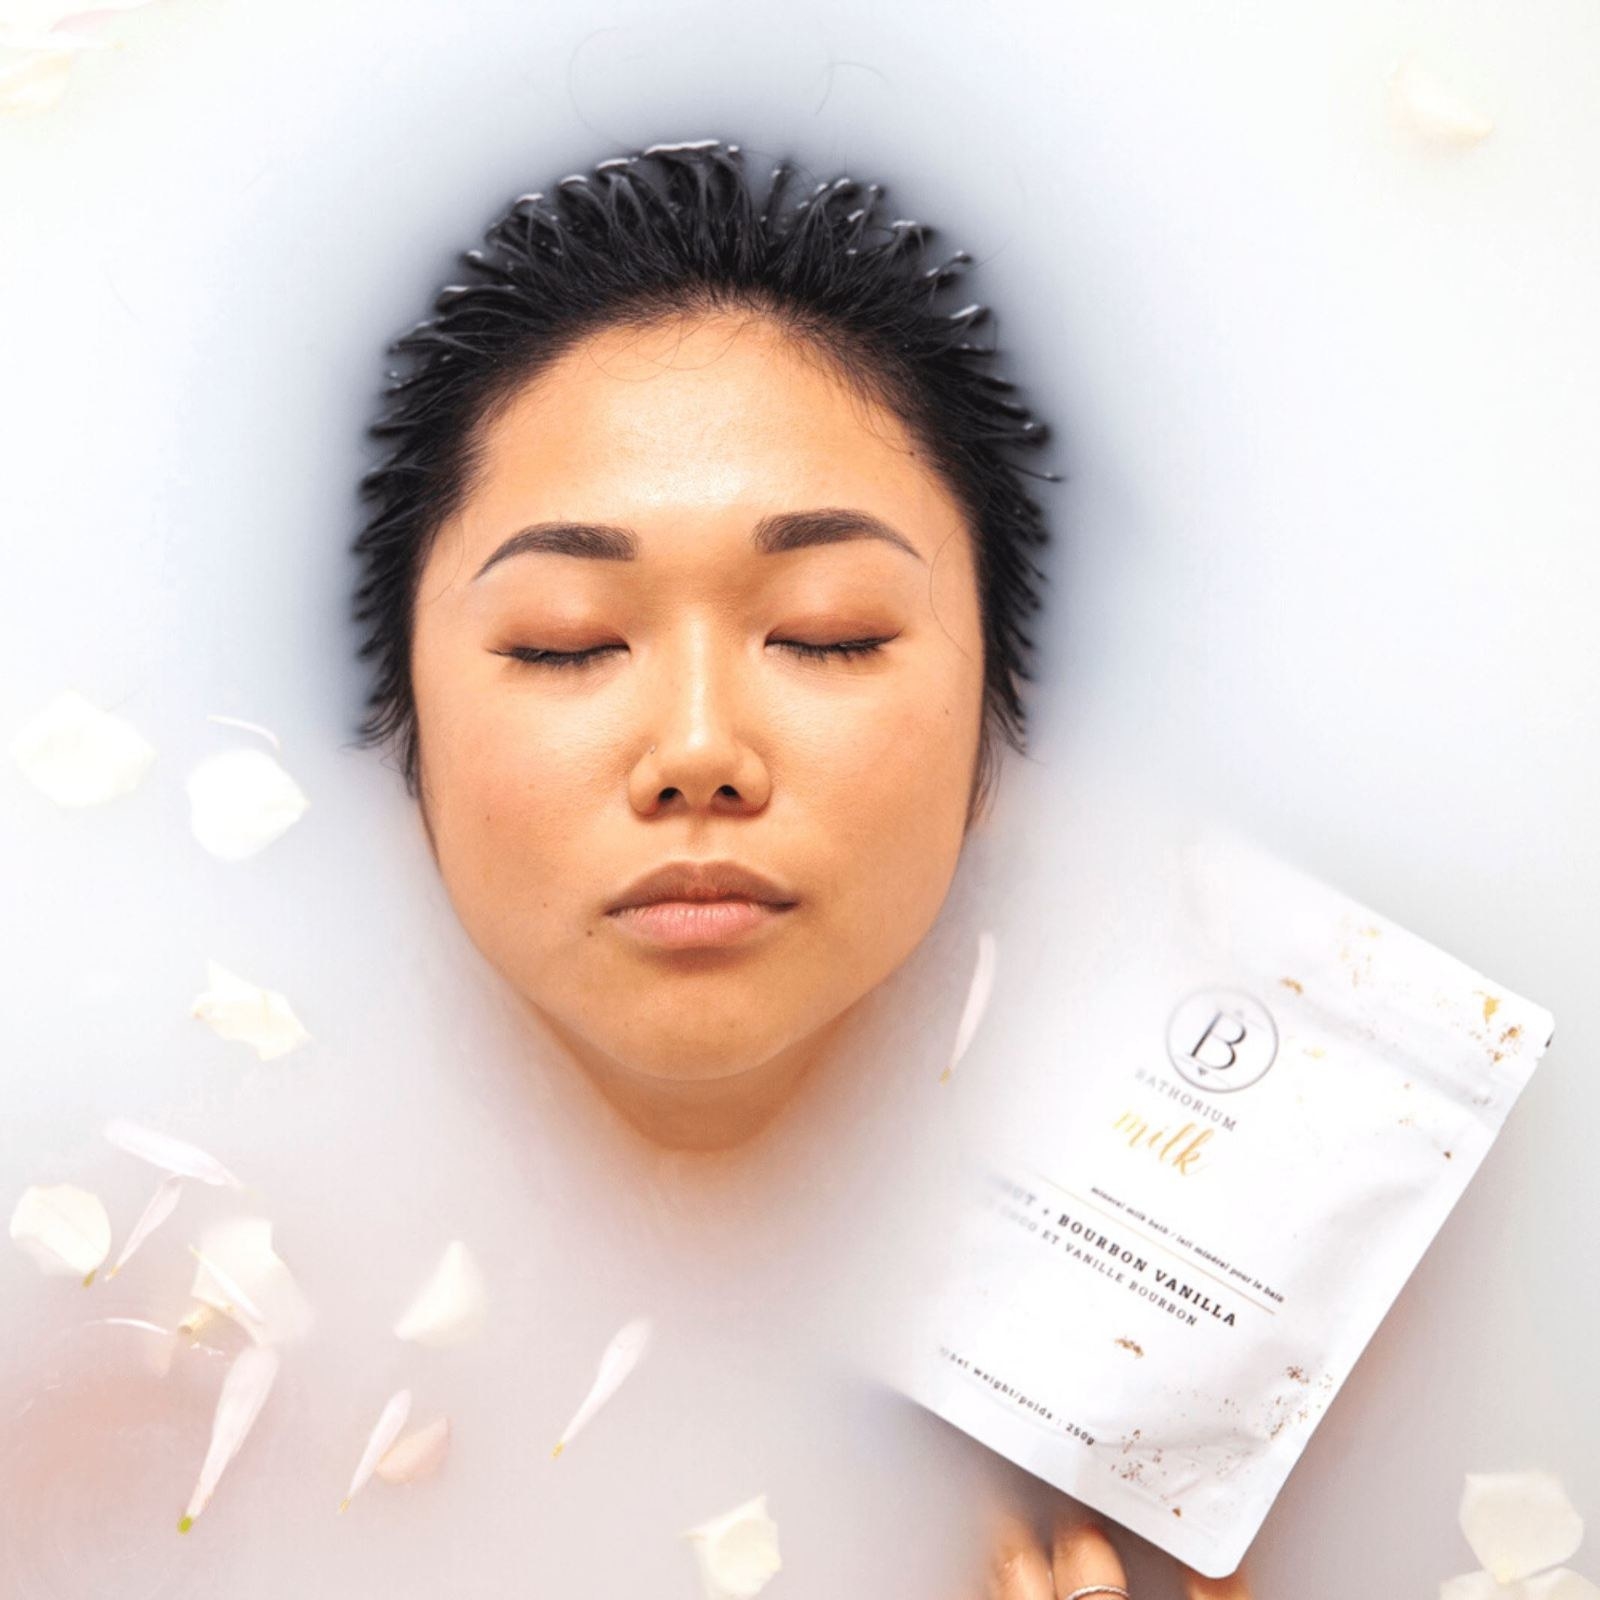 model inside a milky bath with the product packaging by their face